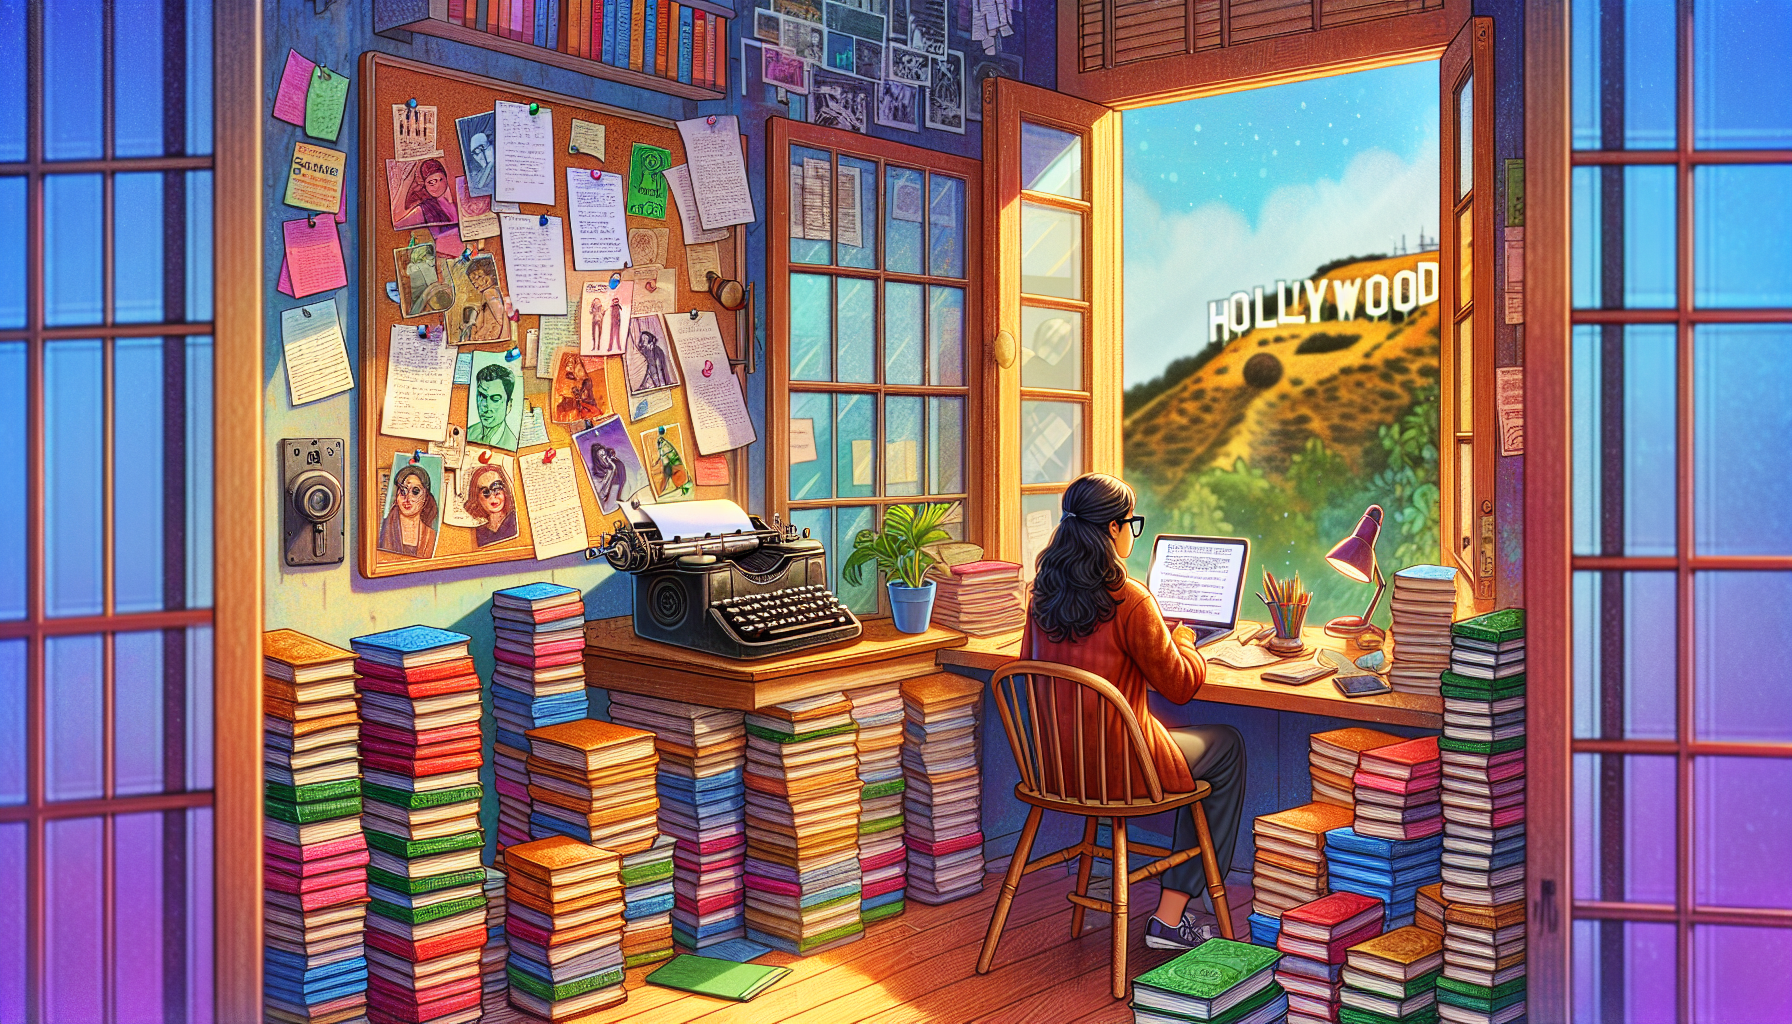 An imaginative scene of a cozy, sunlit writer's nook filled with stacks of screenplay manuscripts, a vintage typewriter, a modern laptop, a corkboard covered in plot notes and colorful character sketches, with a hopeful screenwriter glimpsing a Hollywood sign through the window.